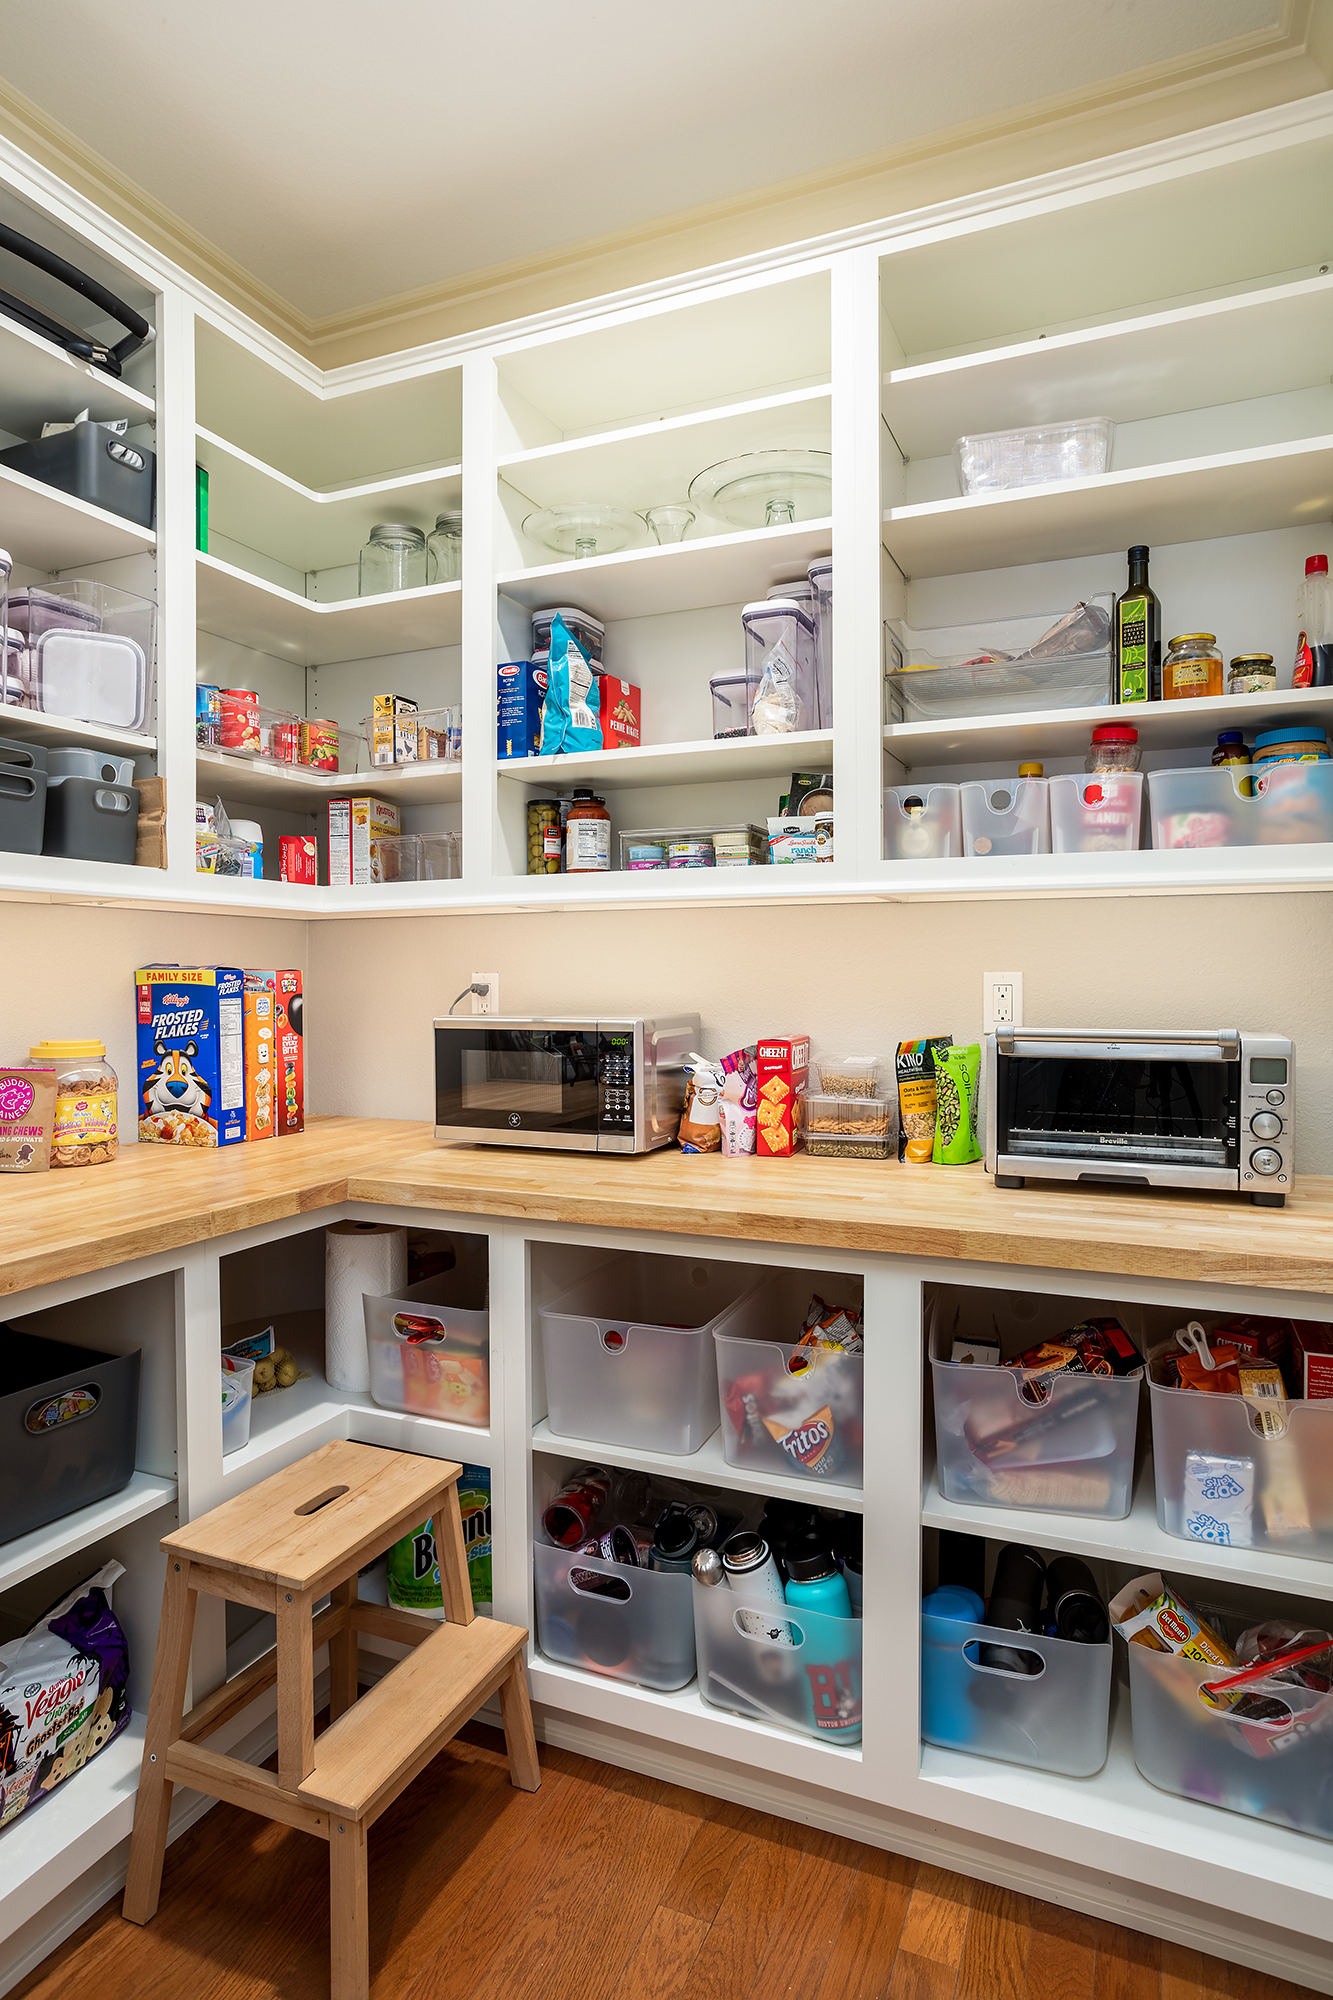 4 Simple Tips For Keeping Your Refrigerator Organized